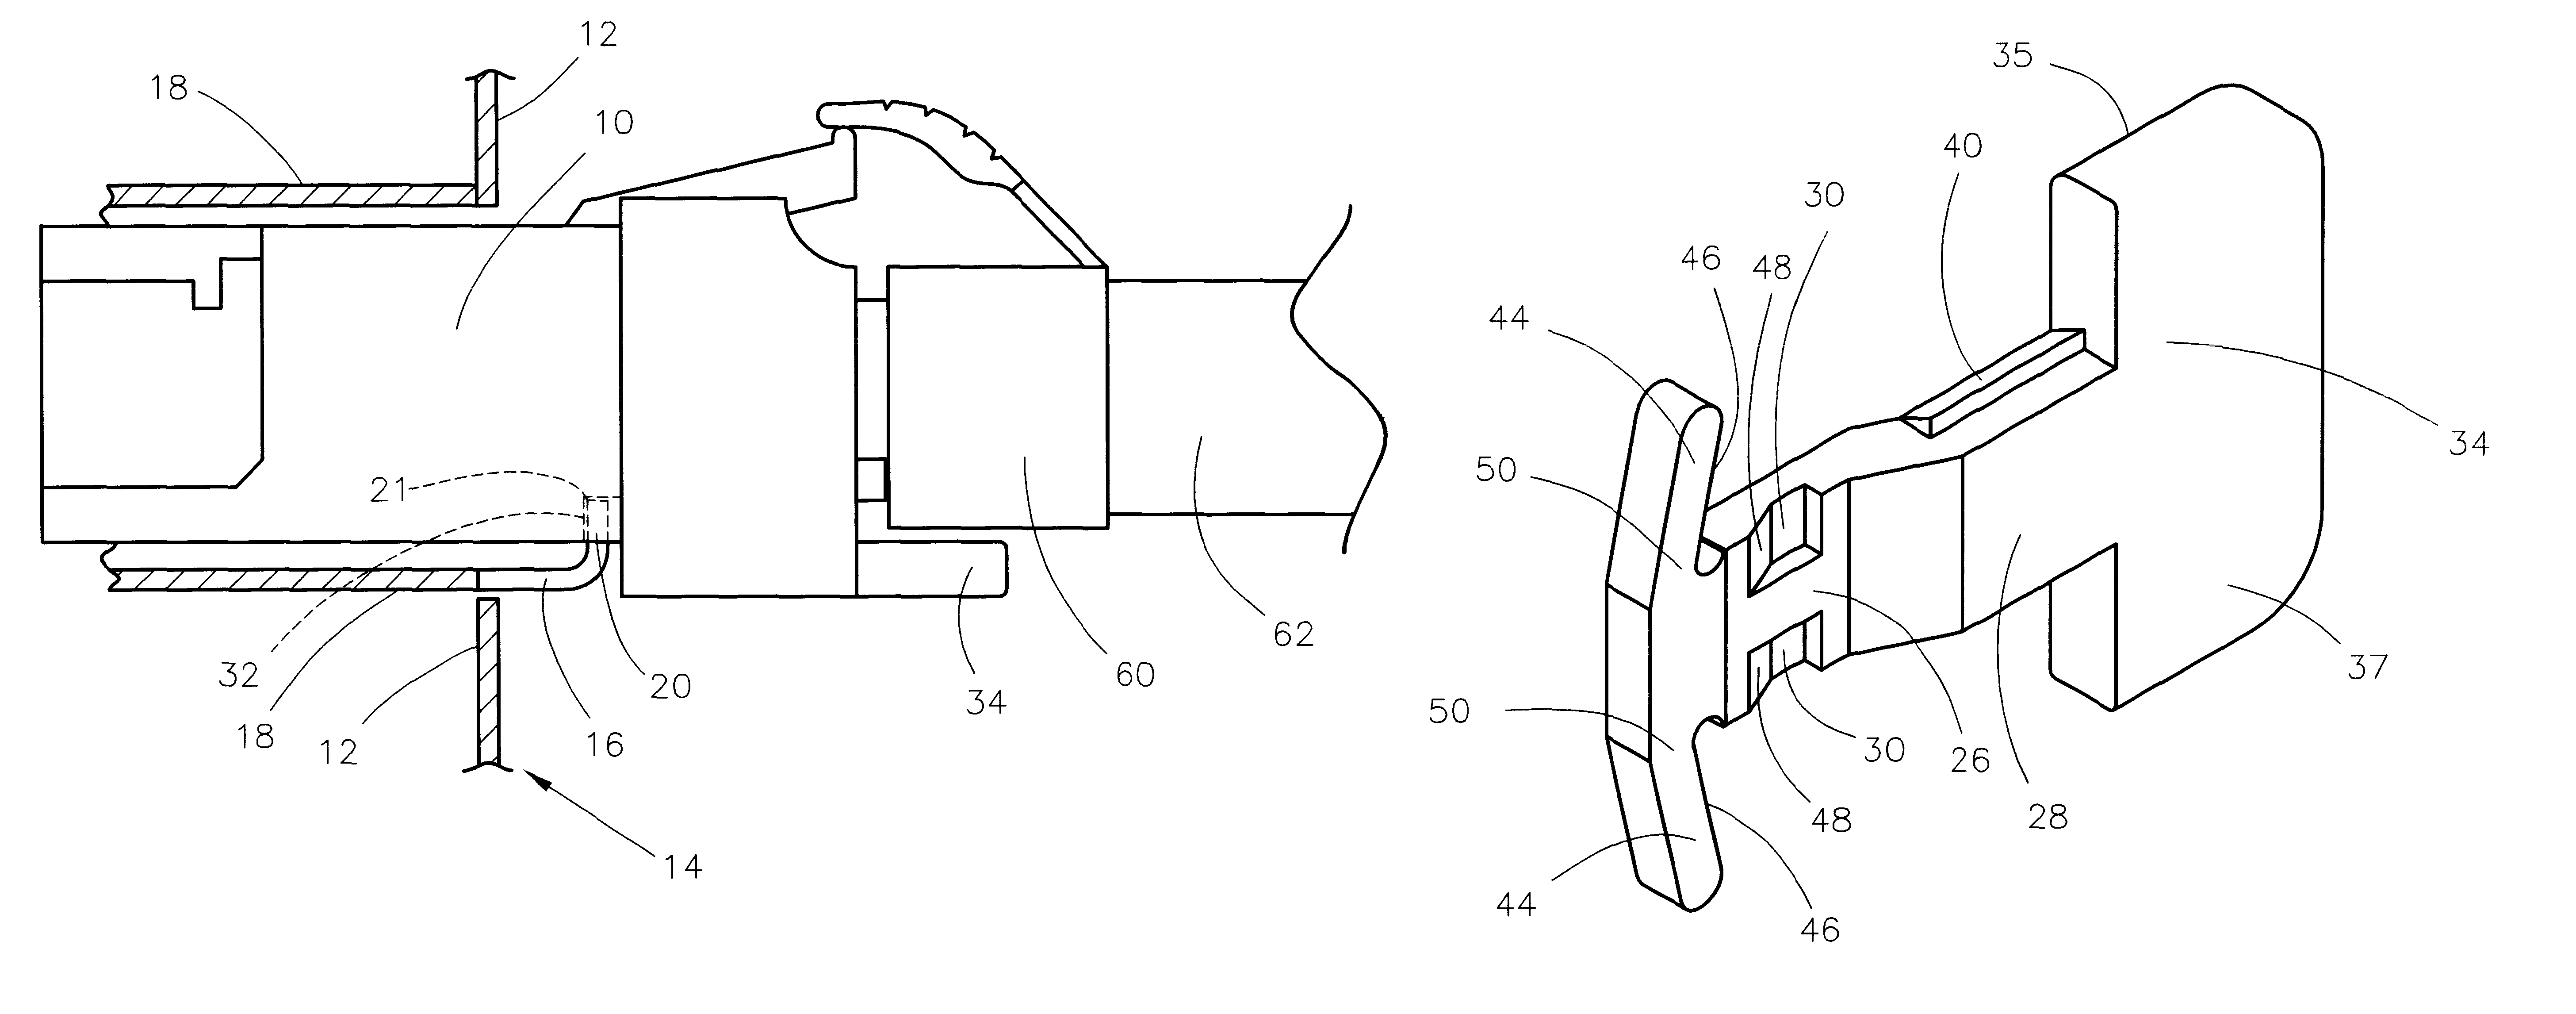 Pull-to-release type latch mechanism for removable small form factor electronic modules